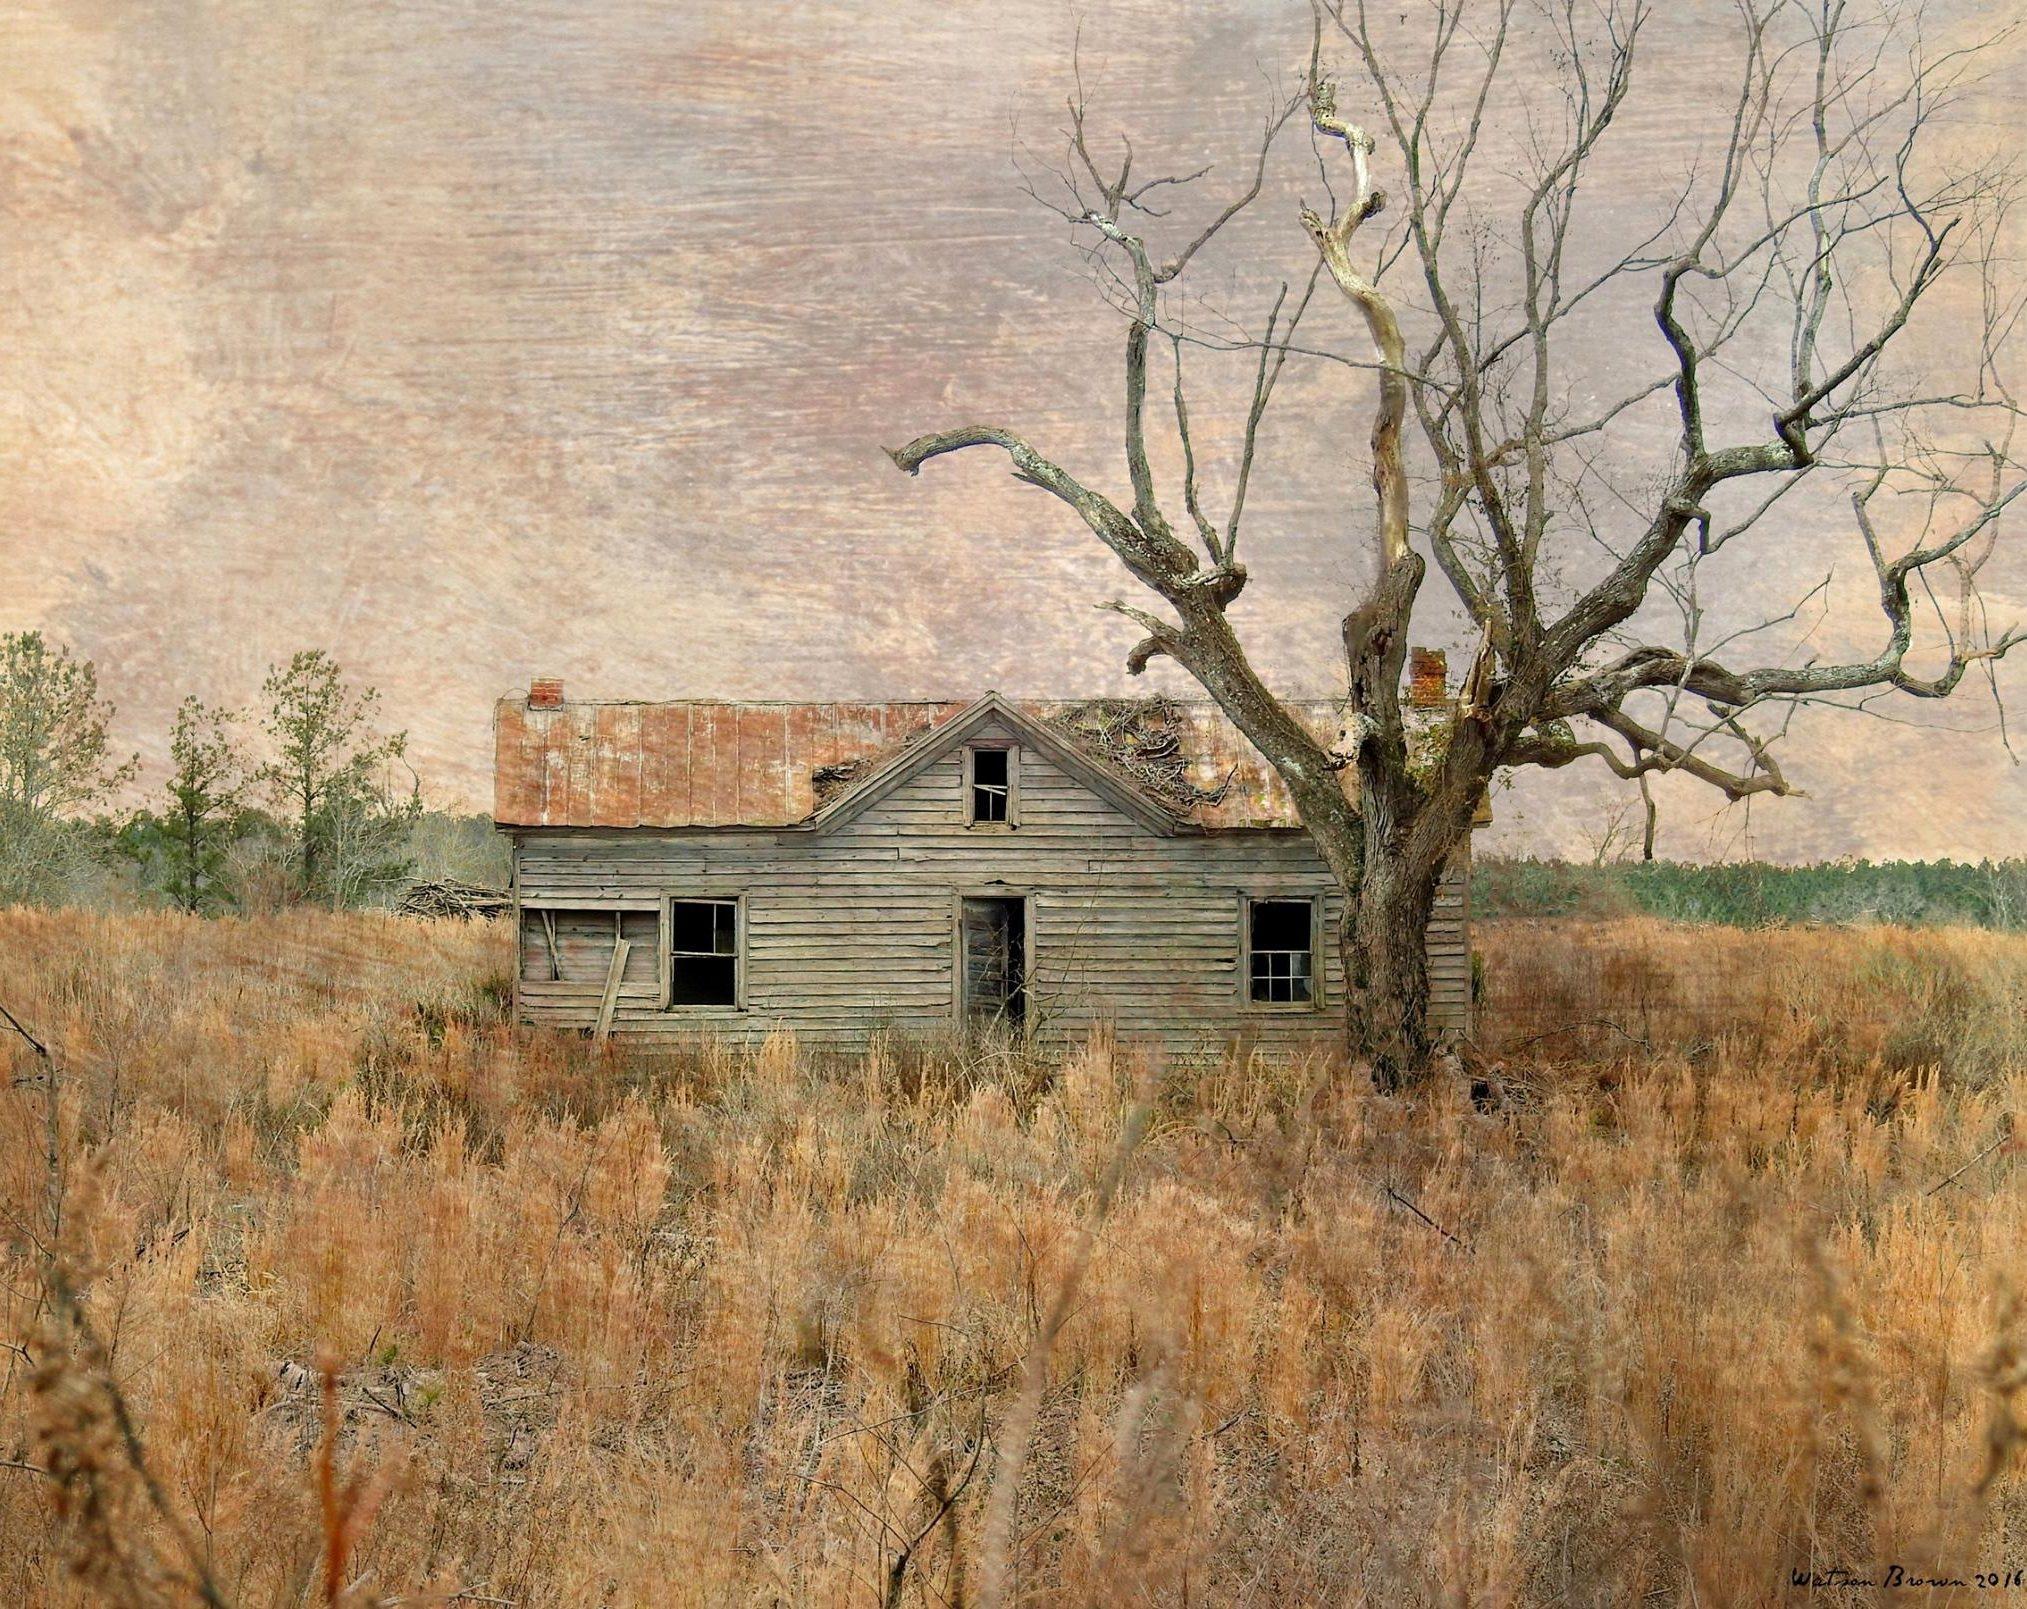 A abandoned house sits in a field of weeds. Next to the house is a large bare tree.